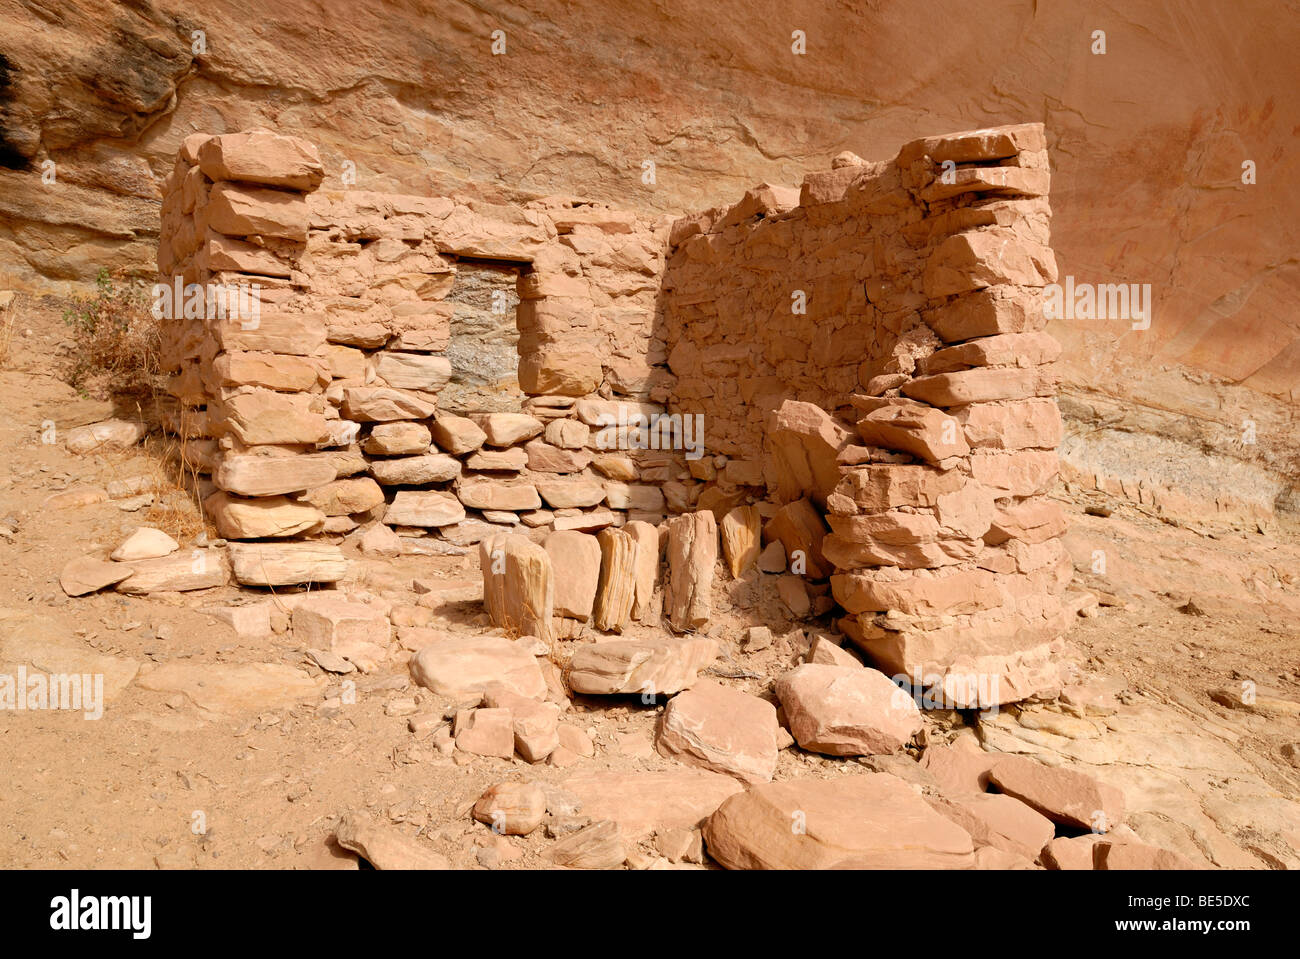 Historic remnants of a dwelling of Anasazi Indians around 1100 AD, Cold Springs Cave near Bluff, Utah, USA Stock Photo